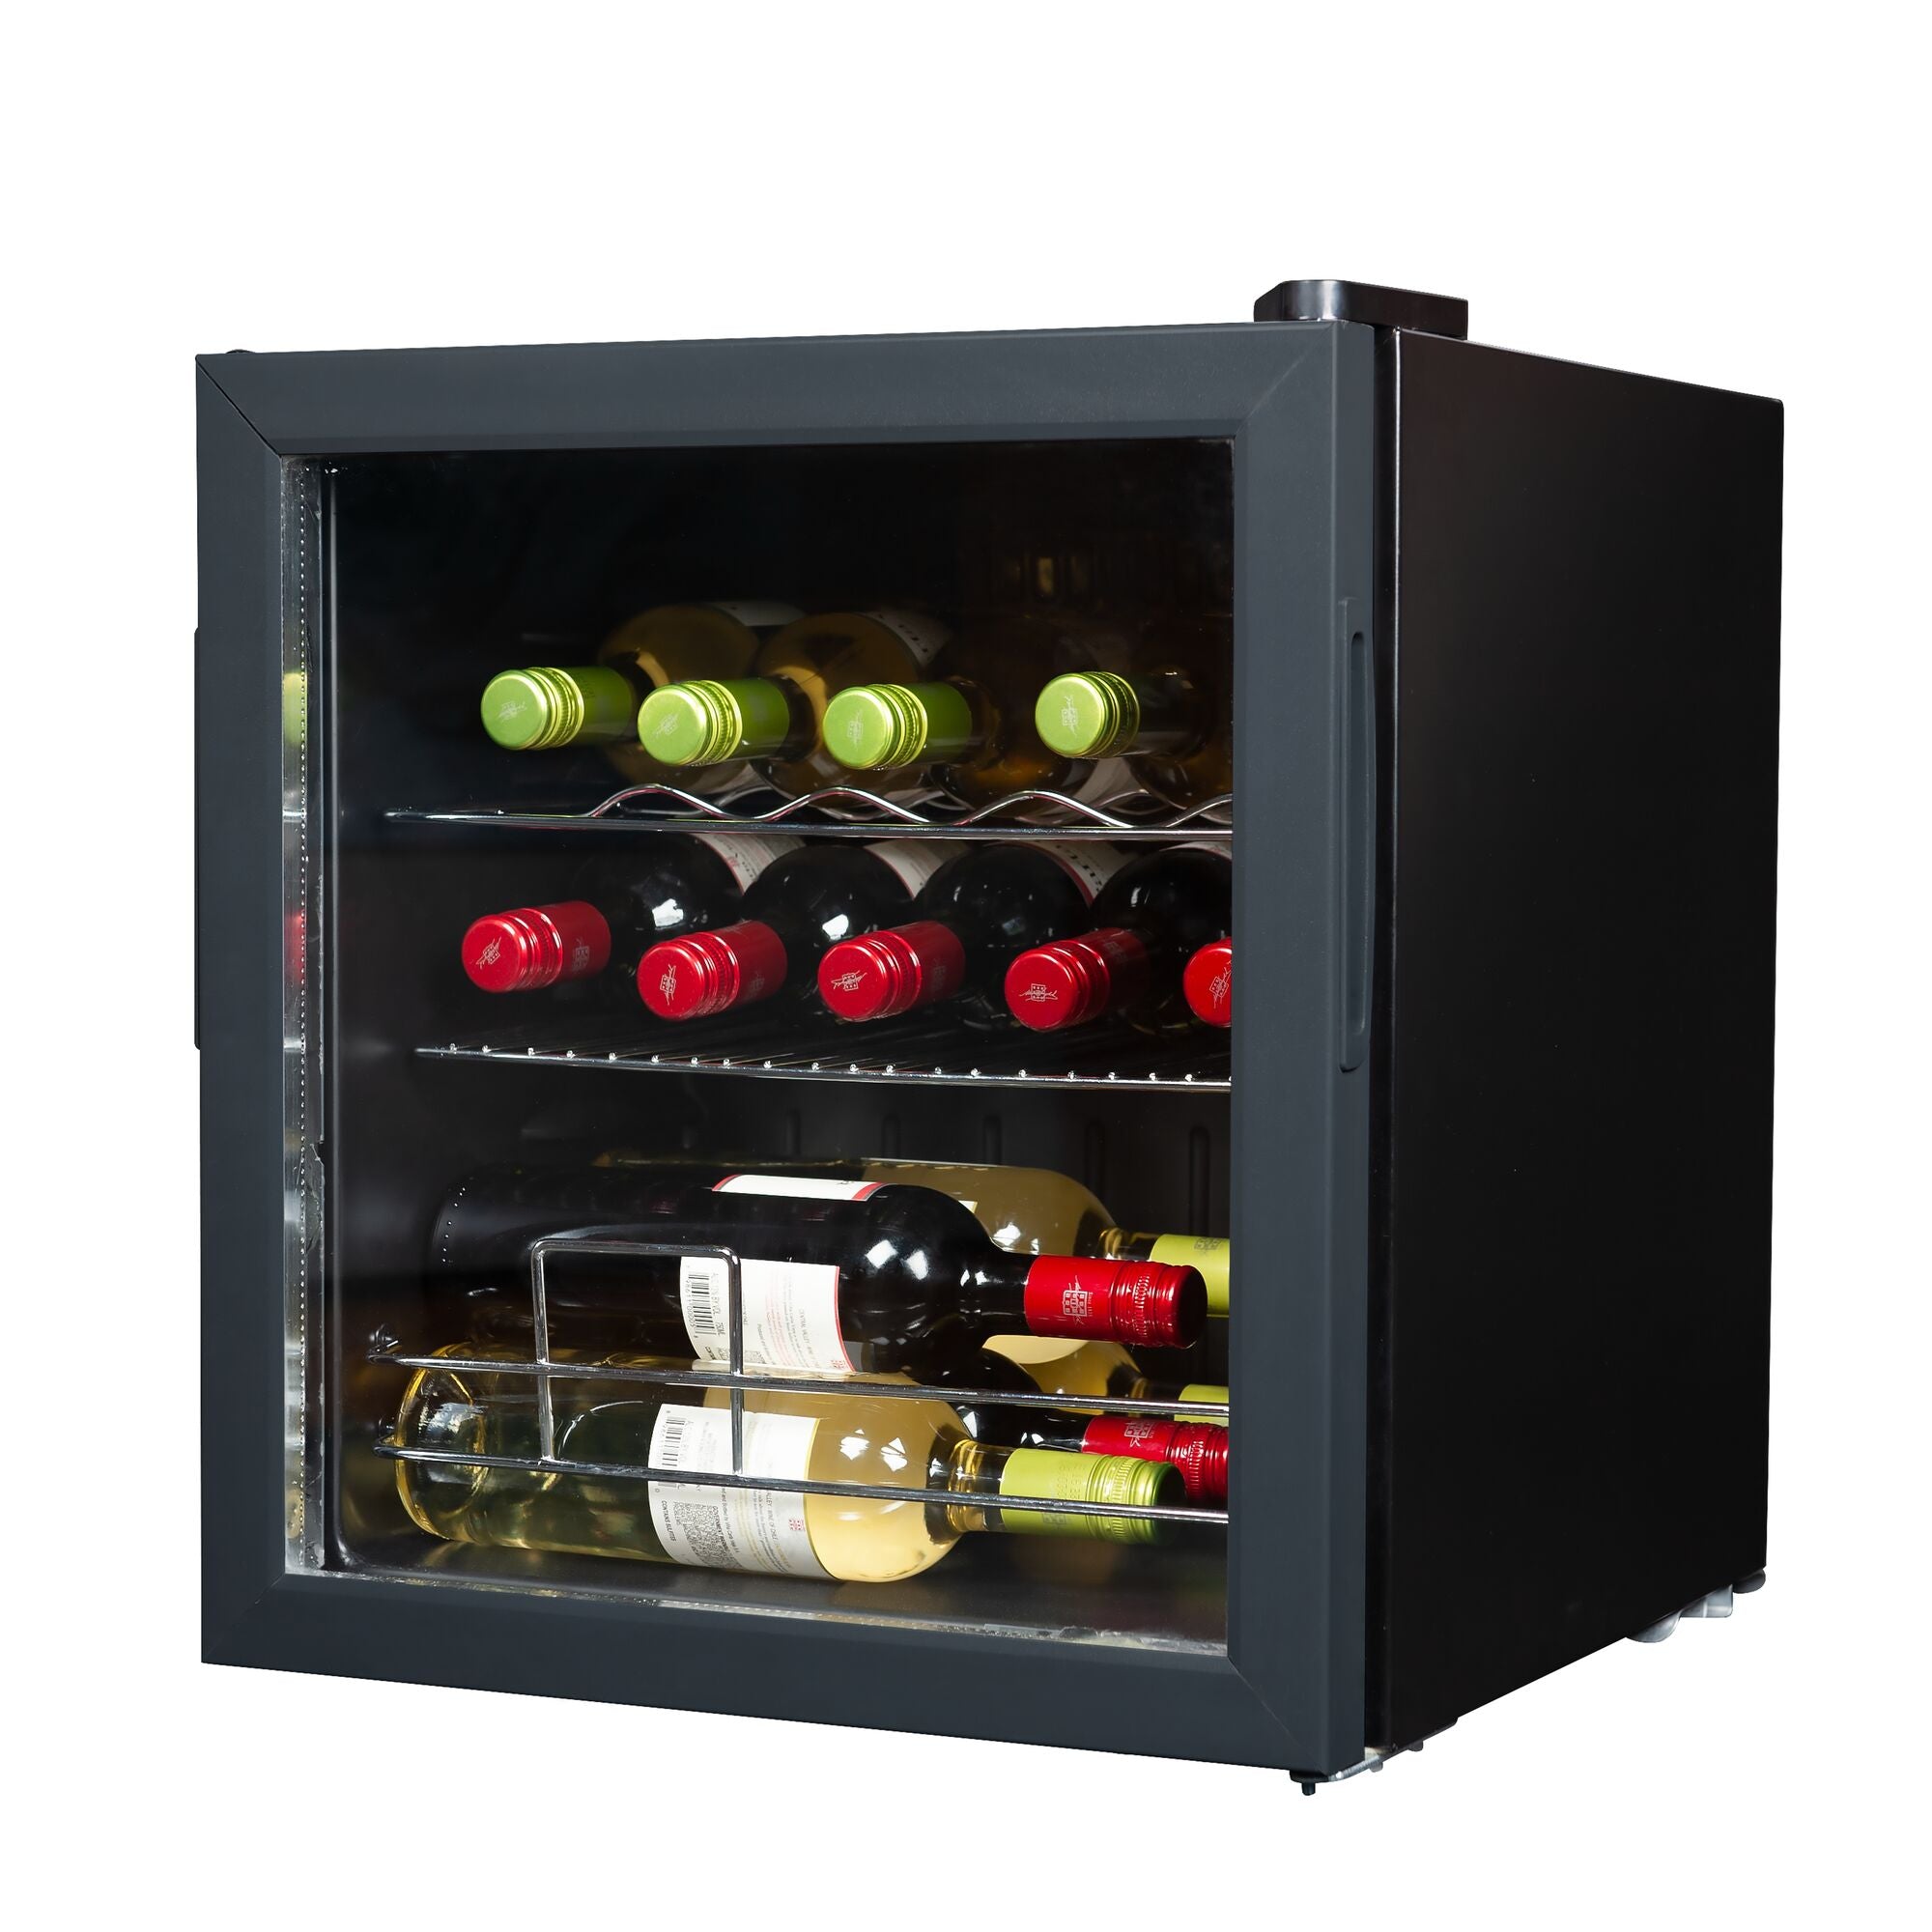 Side angle view of wine cooler with glass front showing